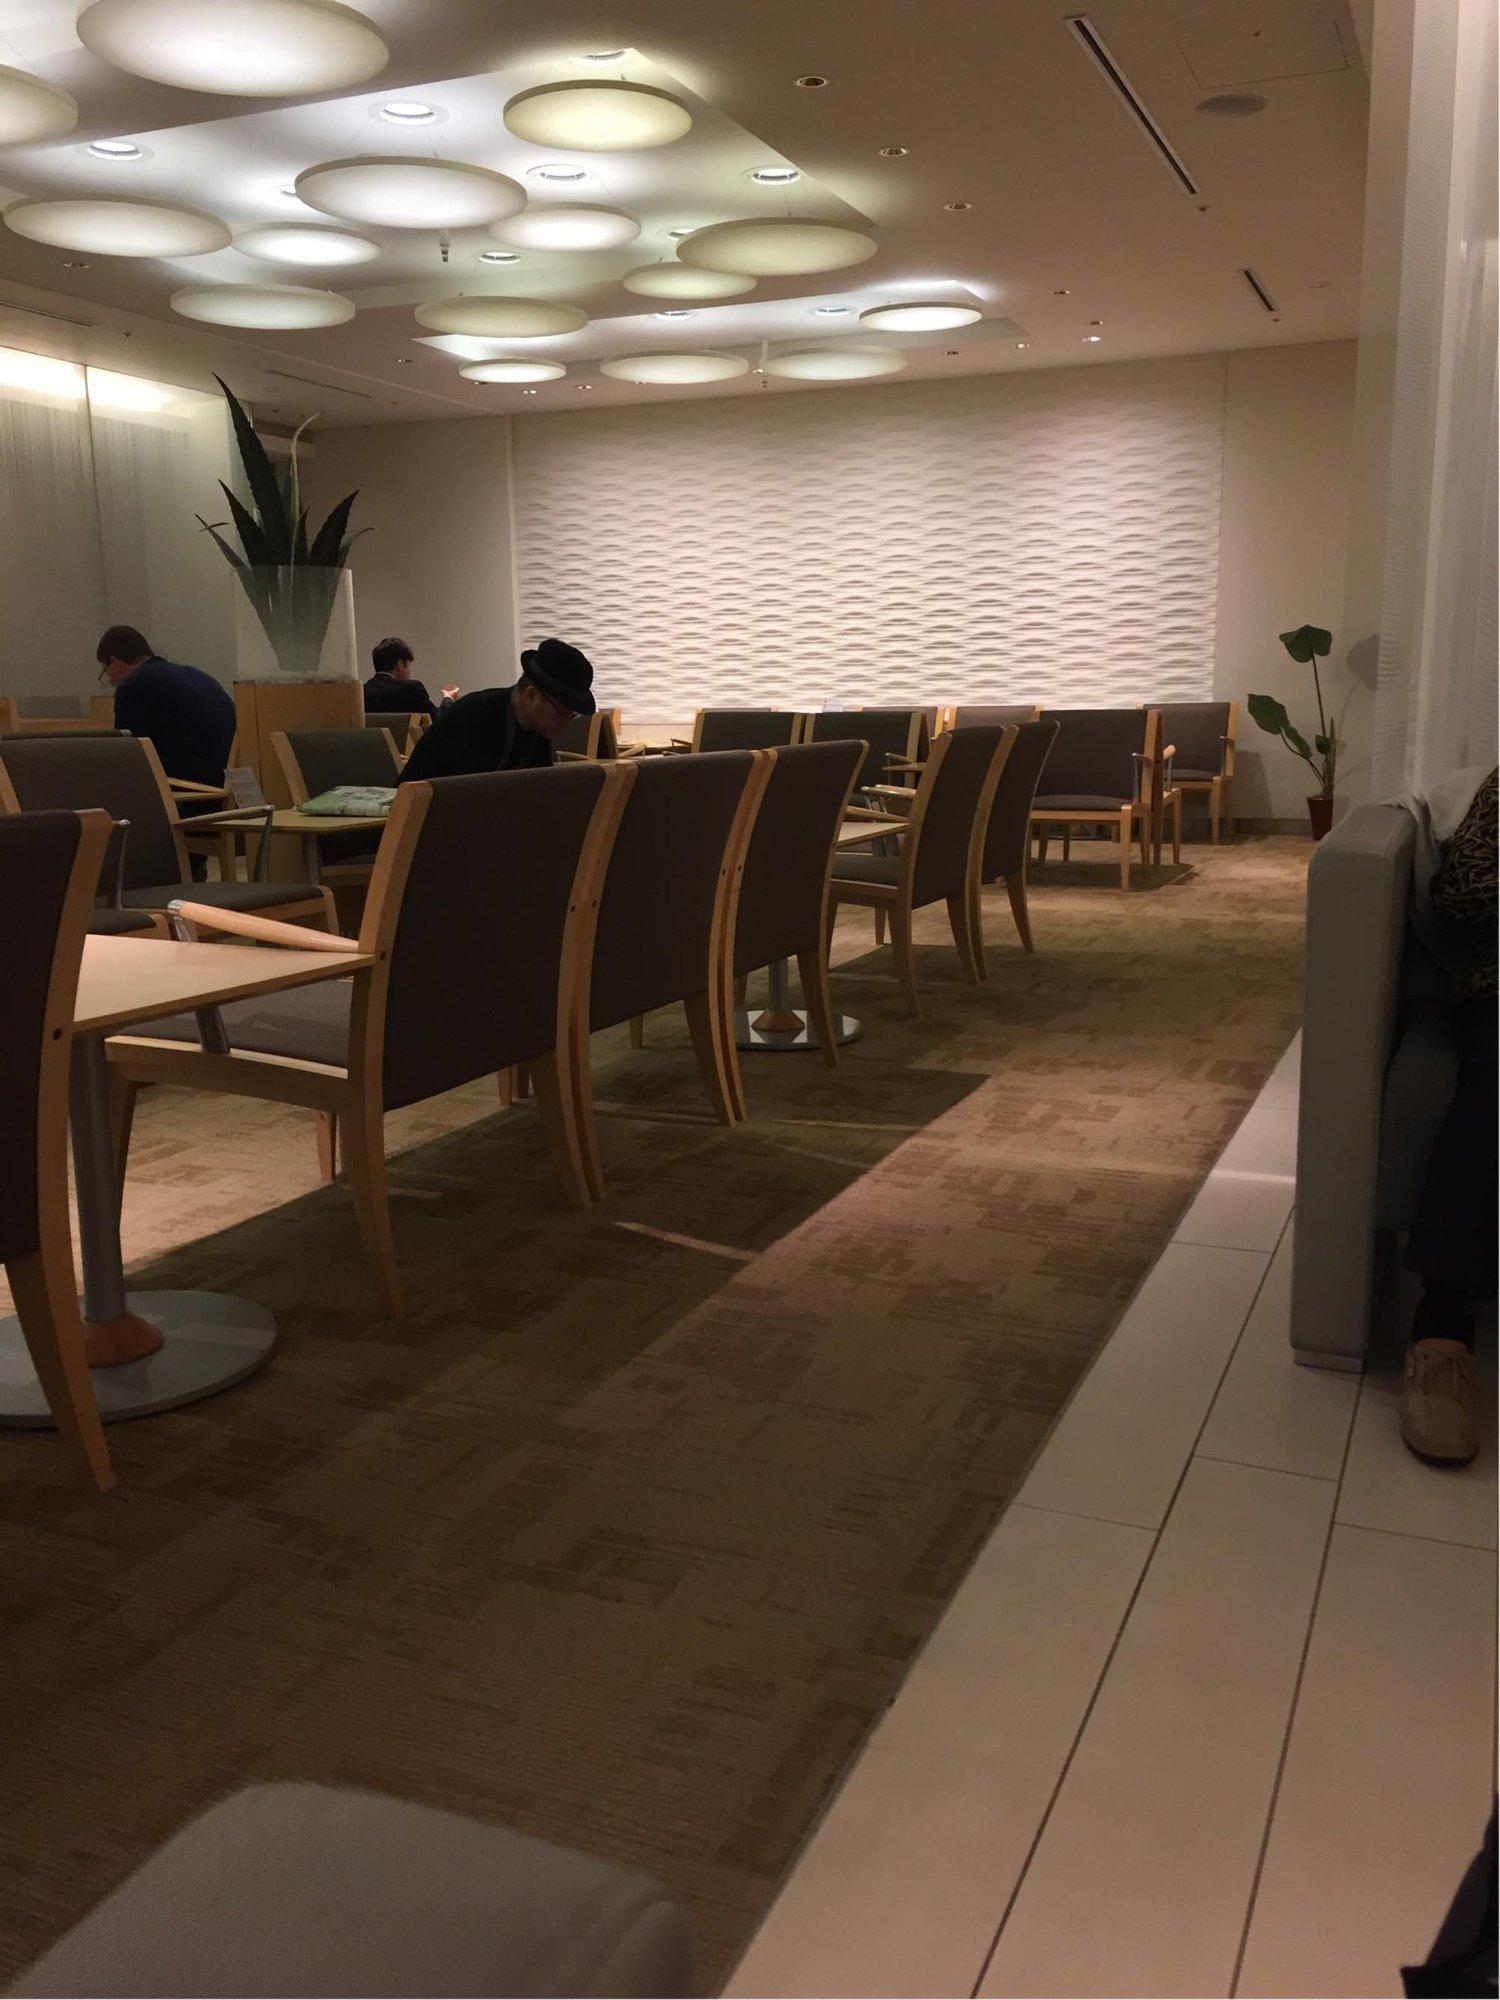 All Nippon Airways ANA Arrival Lounge image 11 of 11